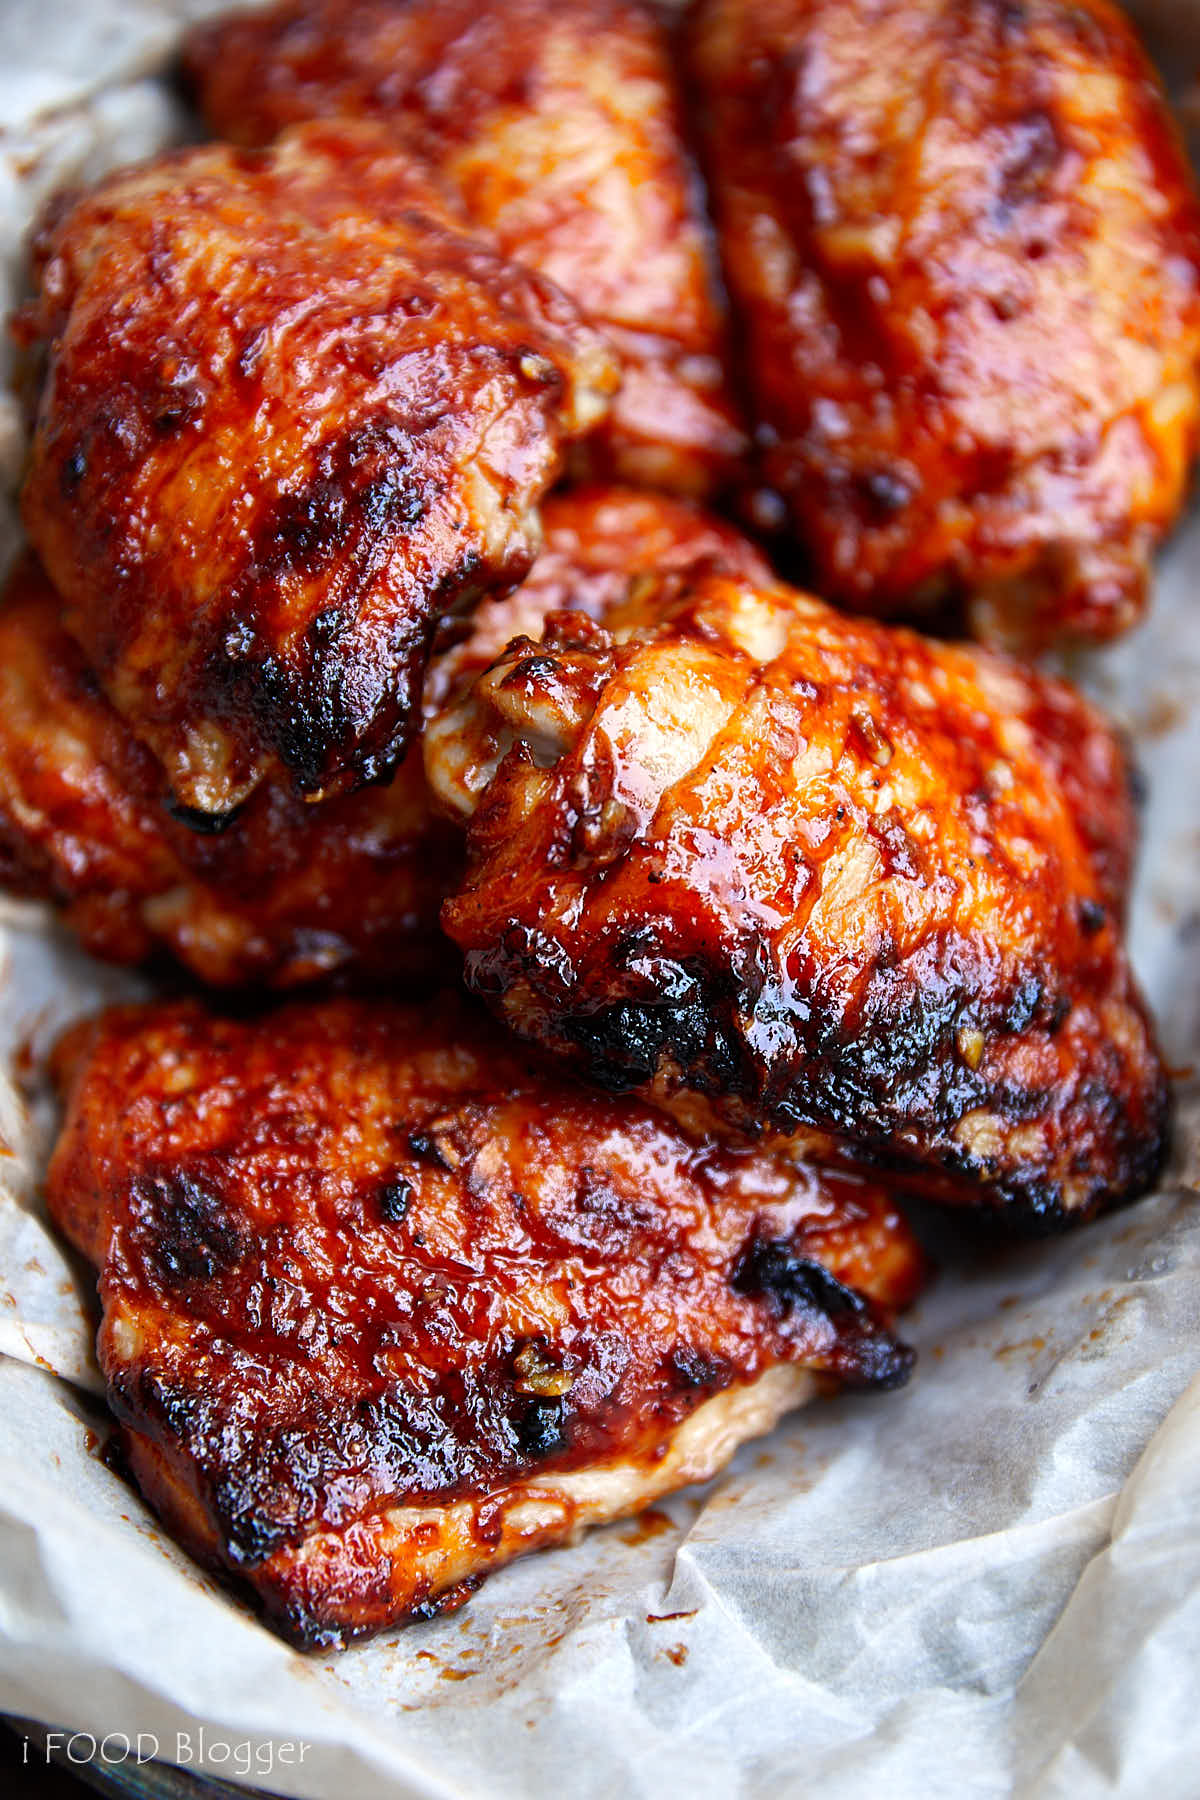 Baked BBQ chicken thighs, beautifully crisped up, saucy, in a serving basket lined with wax paper.